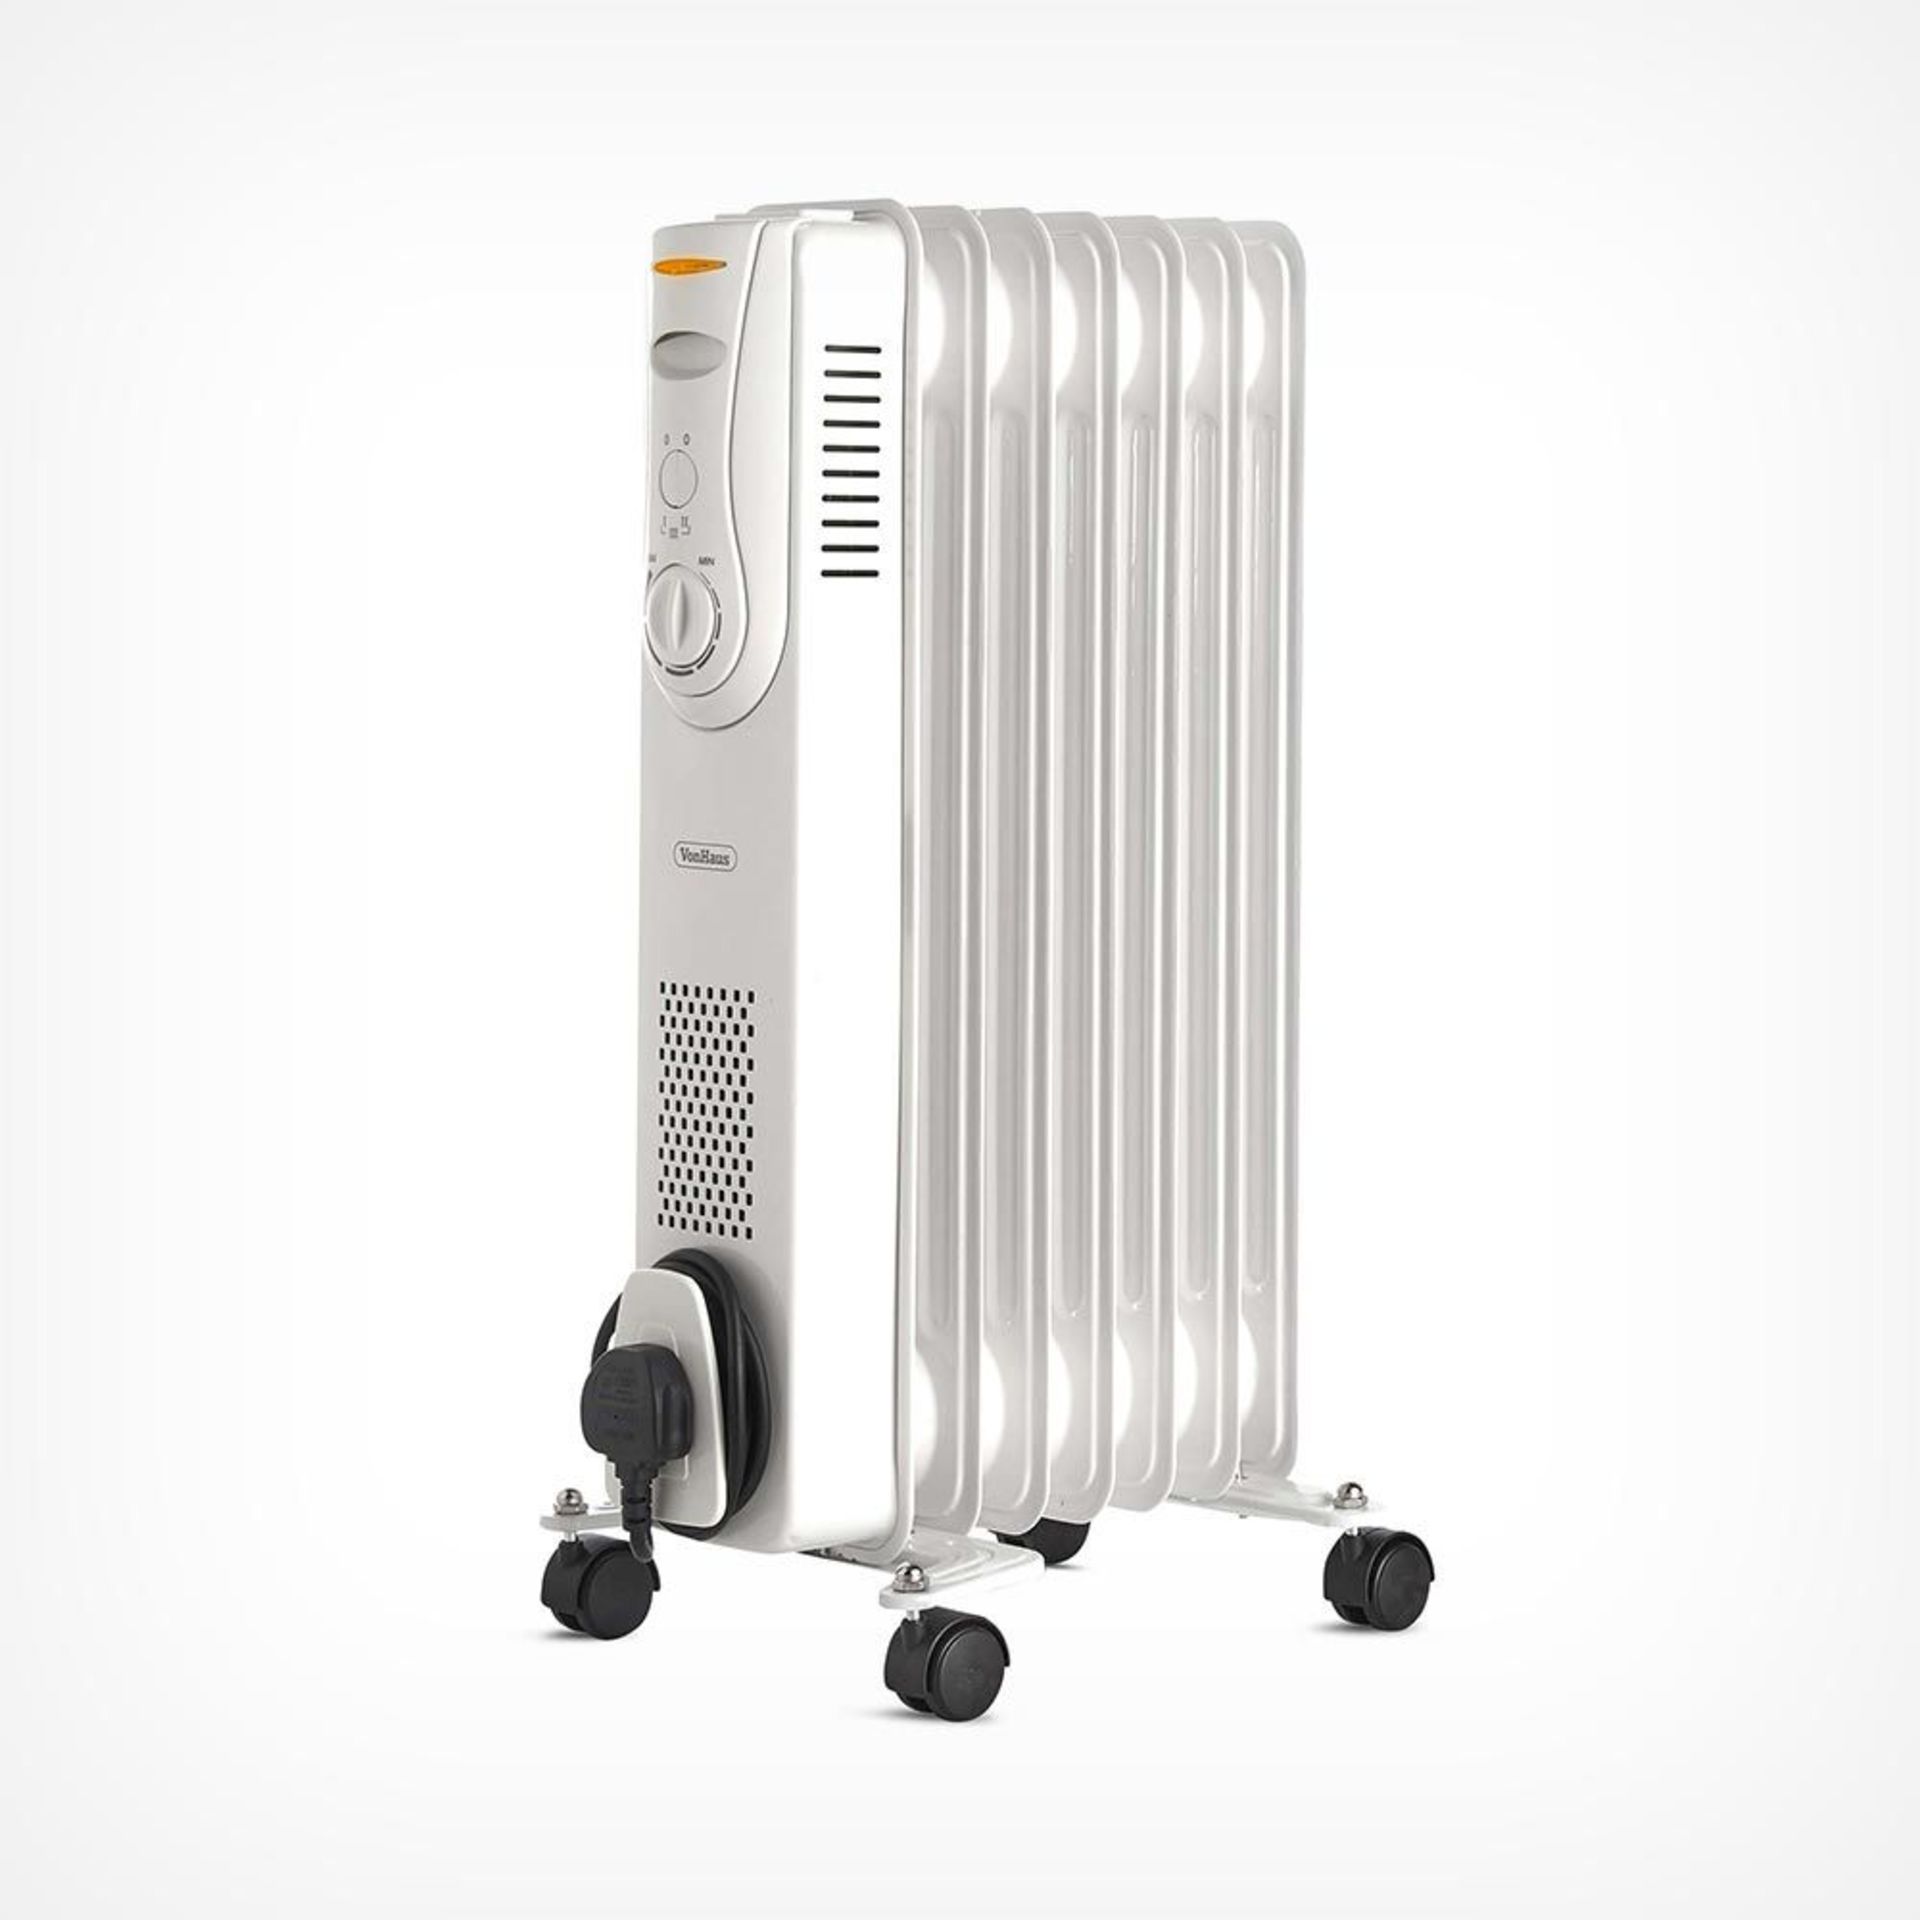 (H135) 7 Fin 1500W Oil Filled Radiator - White Powerful 1500W radiator with 7 oil-filled fins ...( - Image 2 of 3